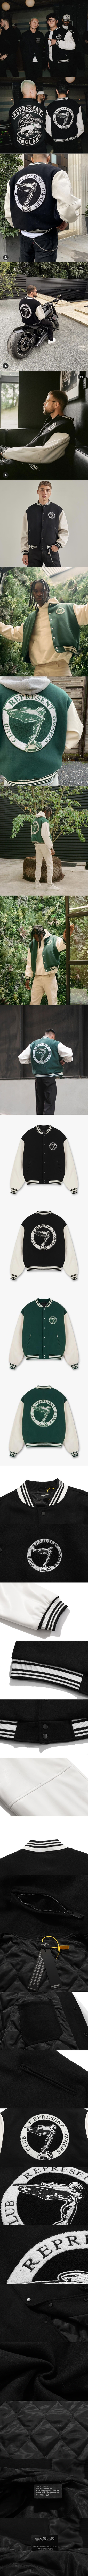 Represent 21FW Owners Club Varsity Jackt リプレゼント オーナーズクラブ バーシティジャケット